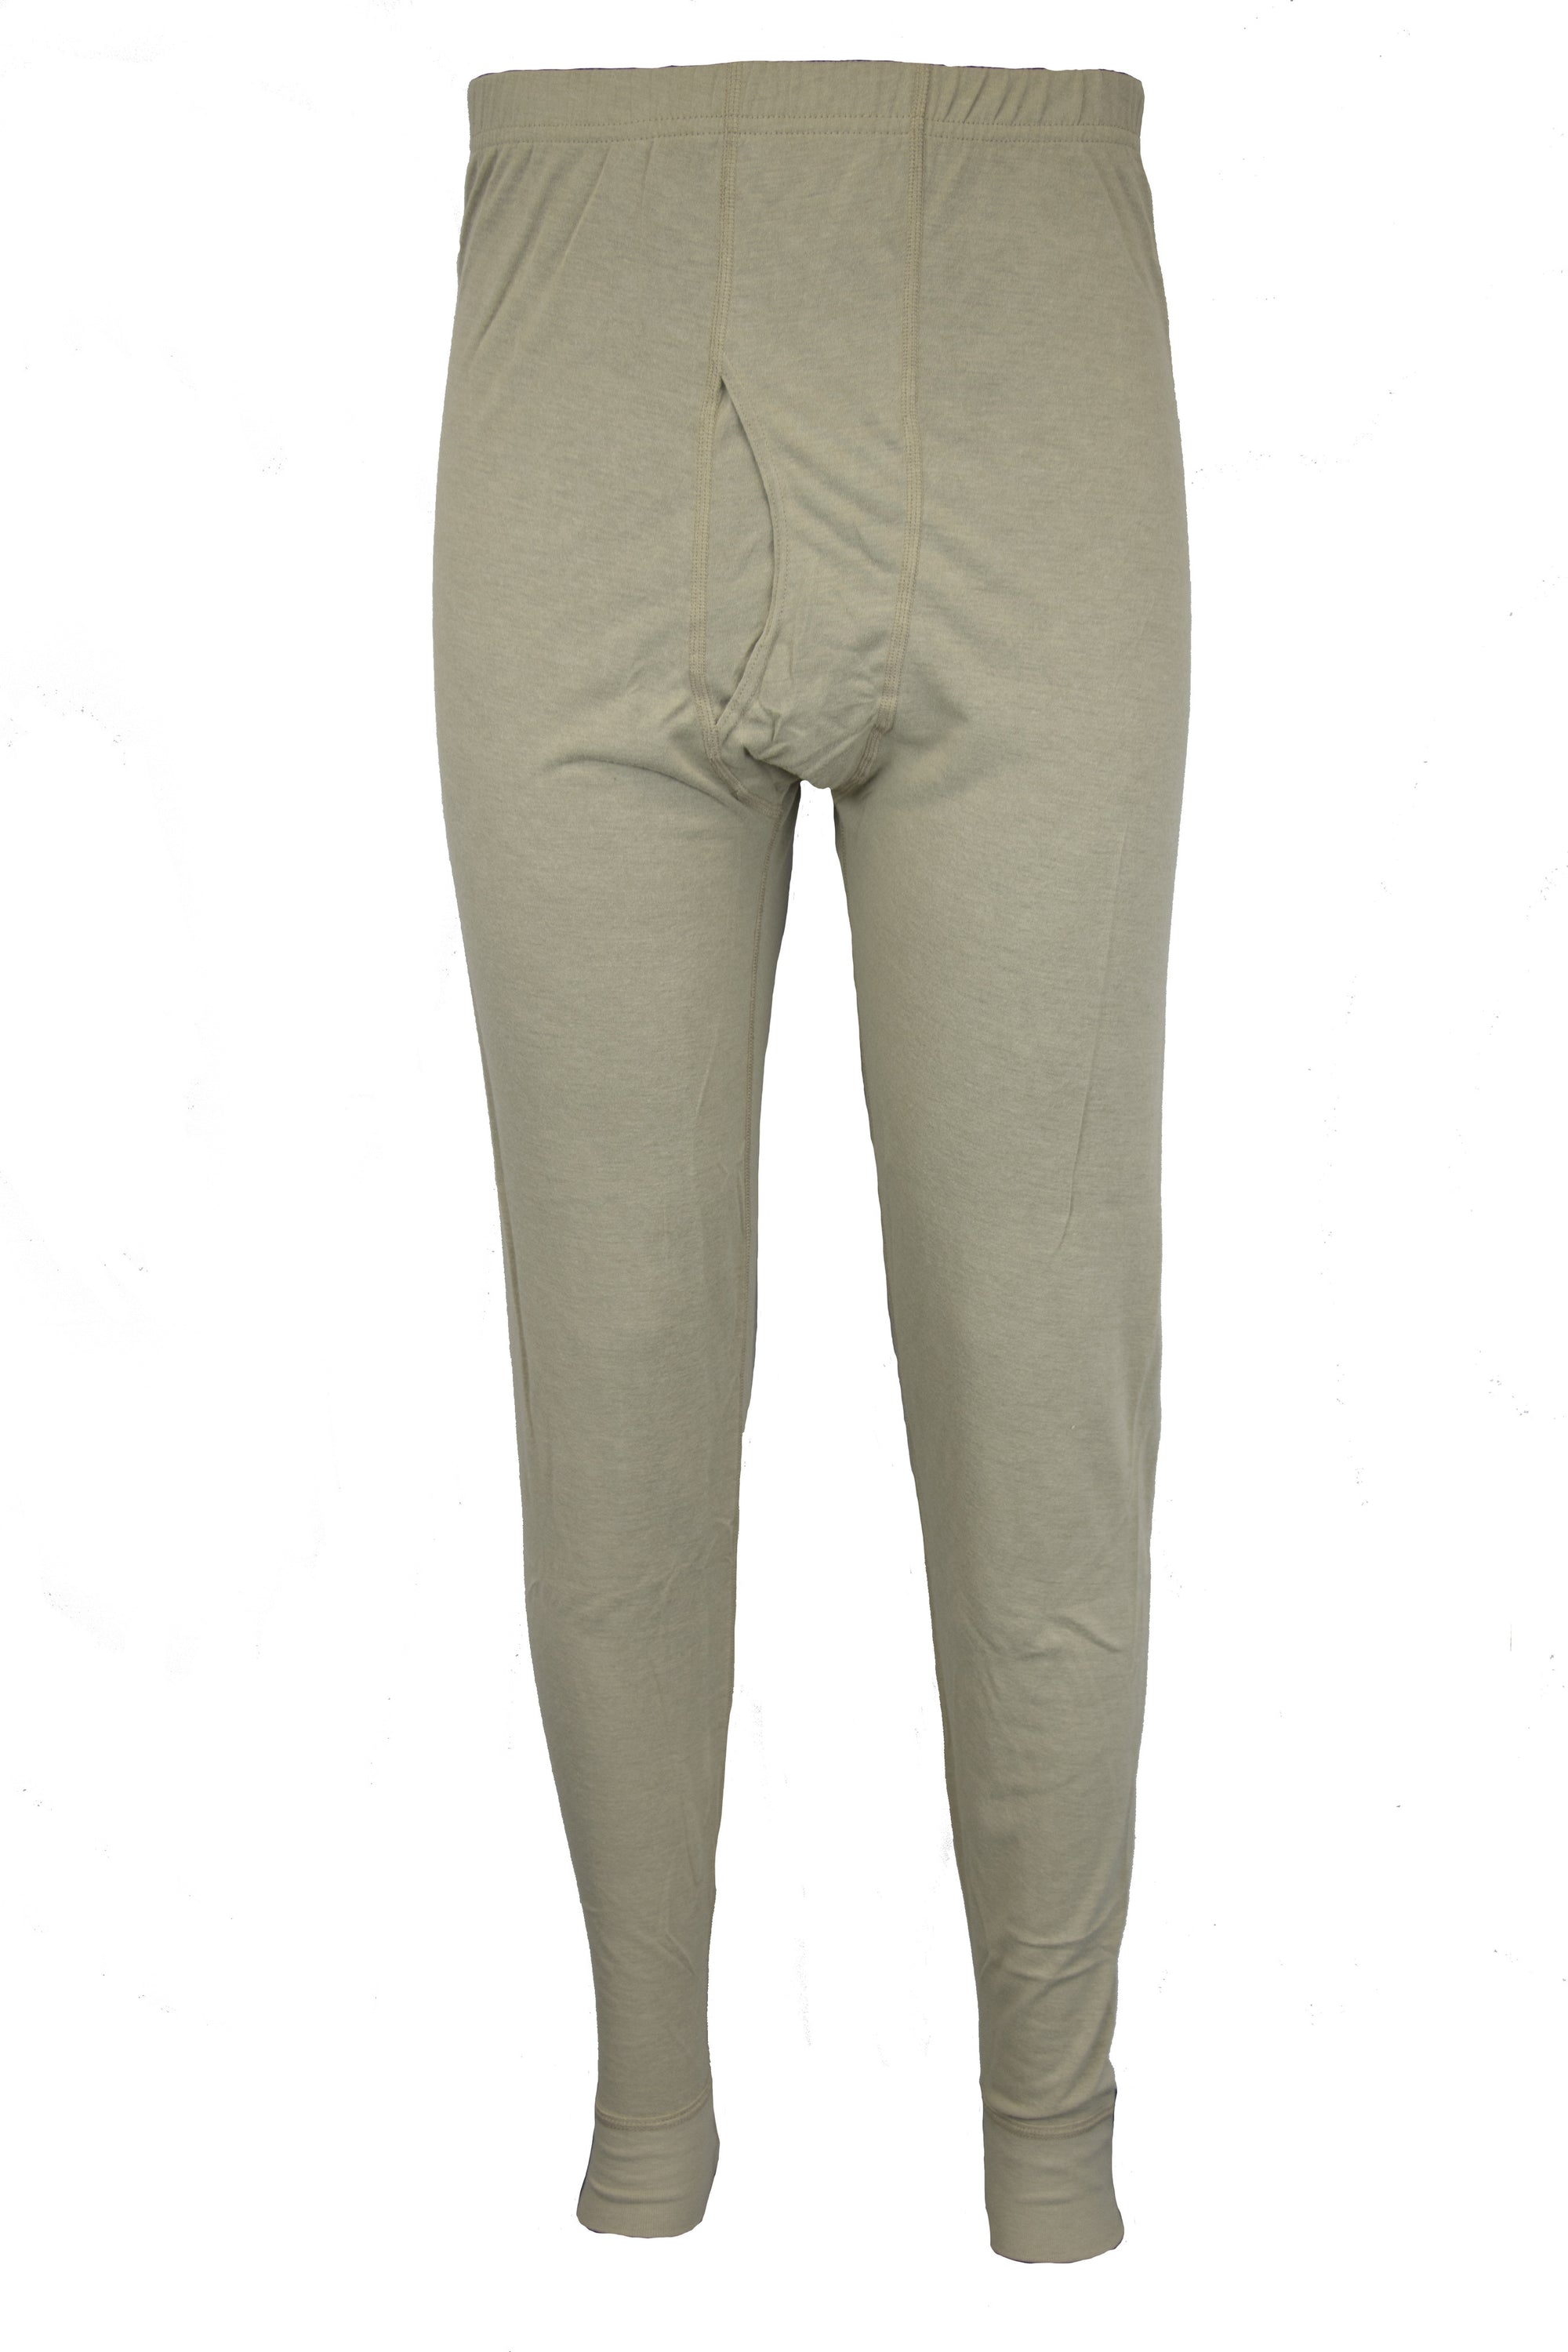 FR Level 1 Mens bottom with fly